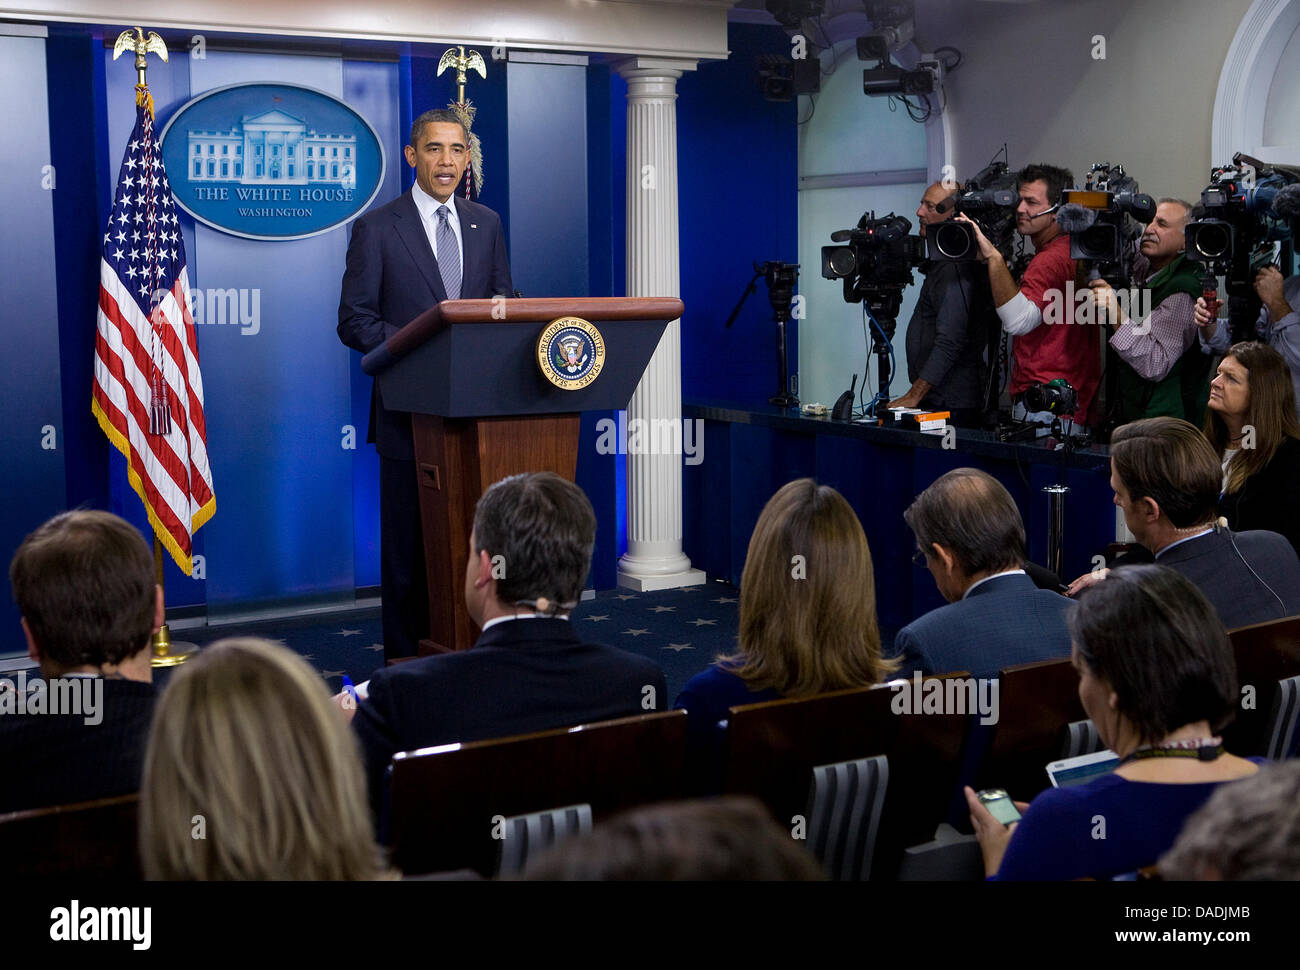 United States President Barack Obama visits the White House Press Briefing Room in Washington, D.C. to announce the official end of the Iraq War on Friday, October 21, 2011. The President said that all American forces will return to the United States by the end of the year and the US will begin normalized relations with Iraq..Credit: Kristoffer Tripplaar / Pool via CNP Stock Photo